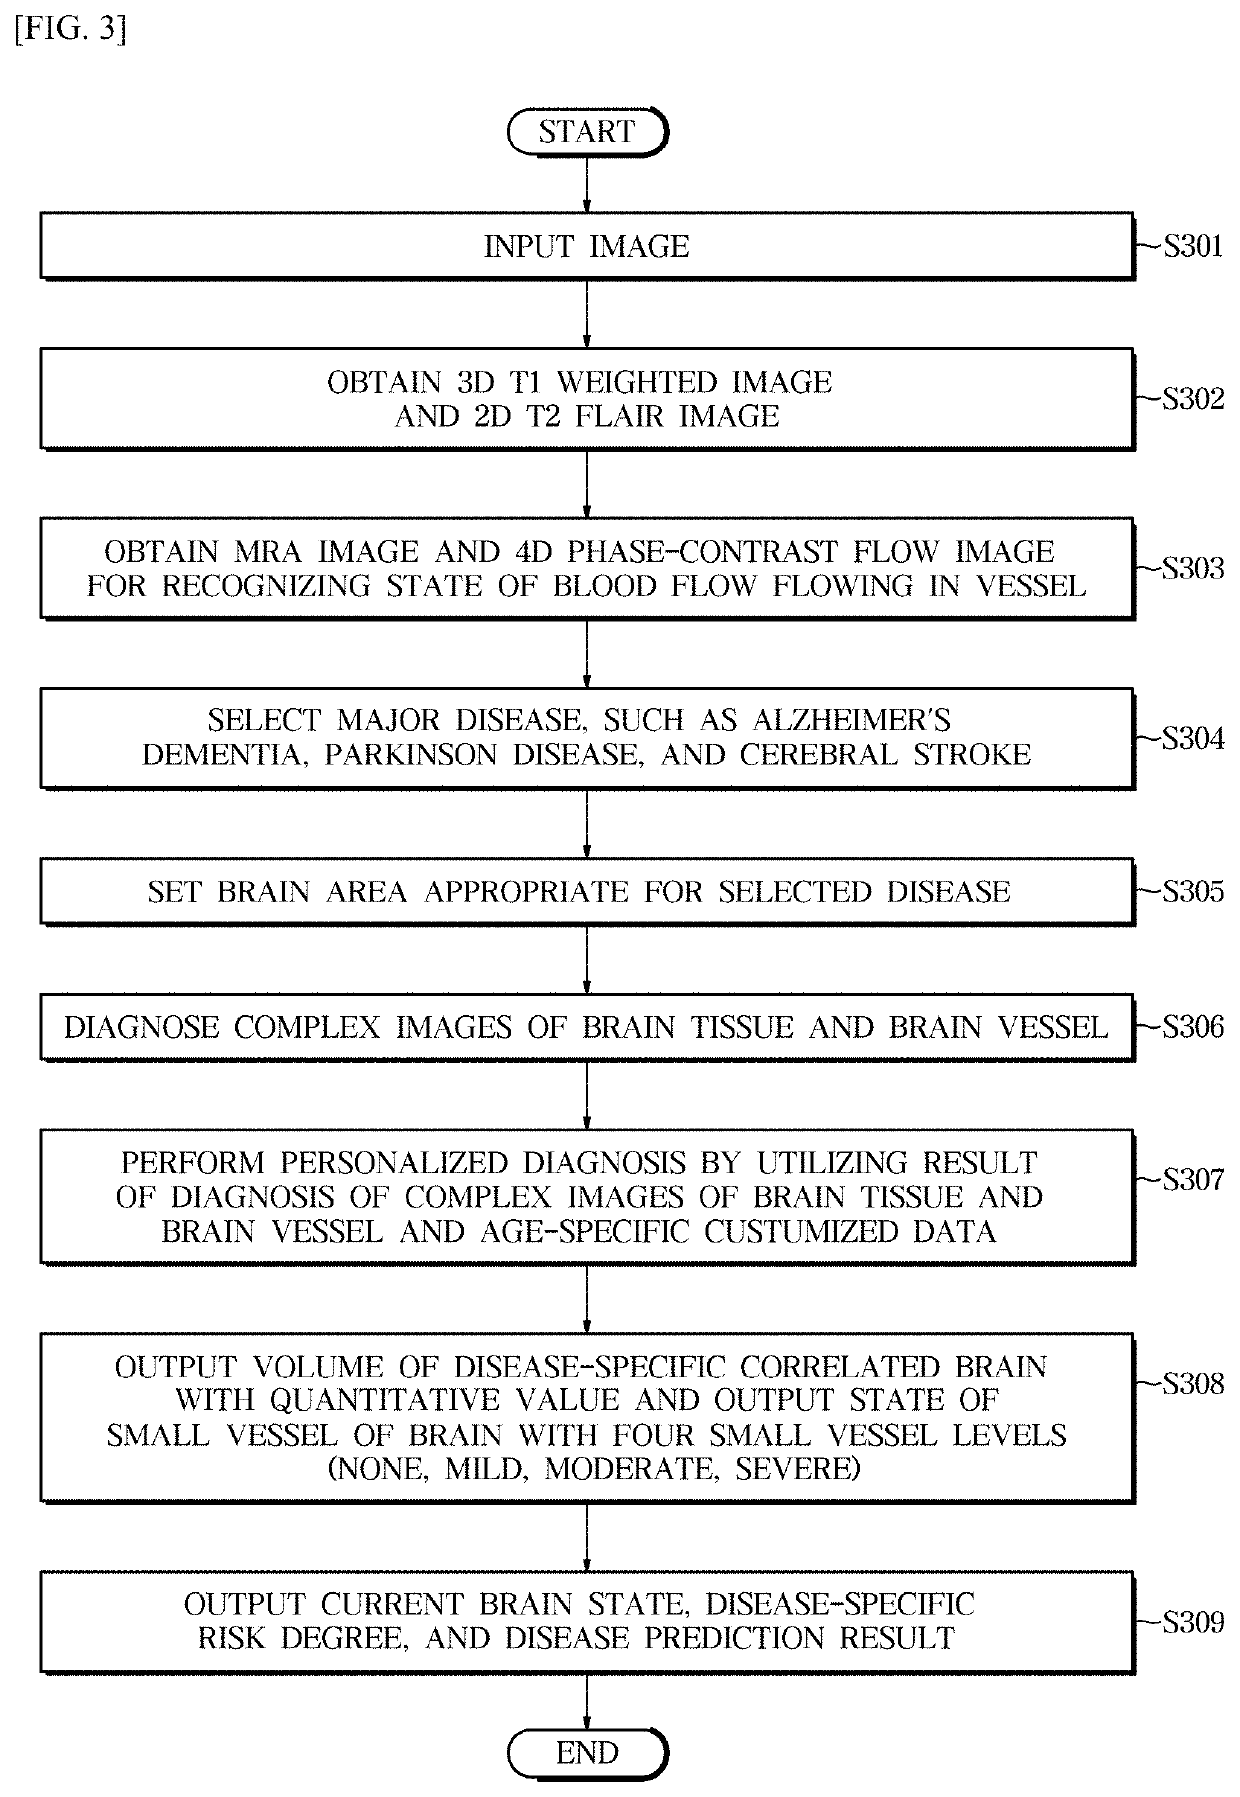 Medical image processing system and method for personalized brain disease diagnosis and status determination